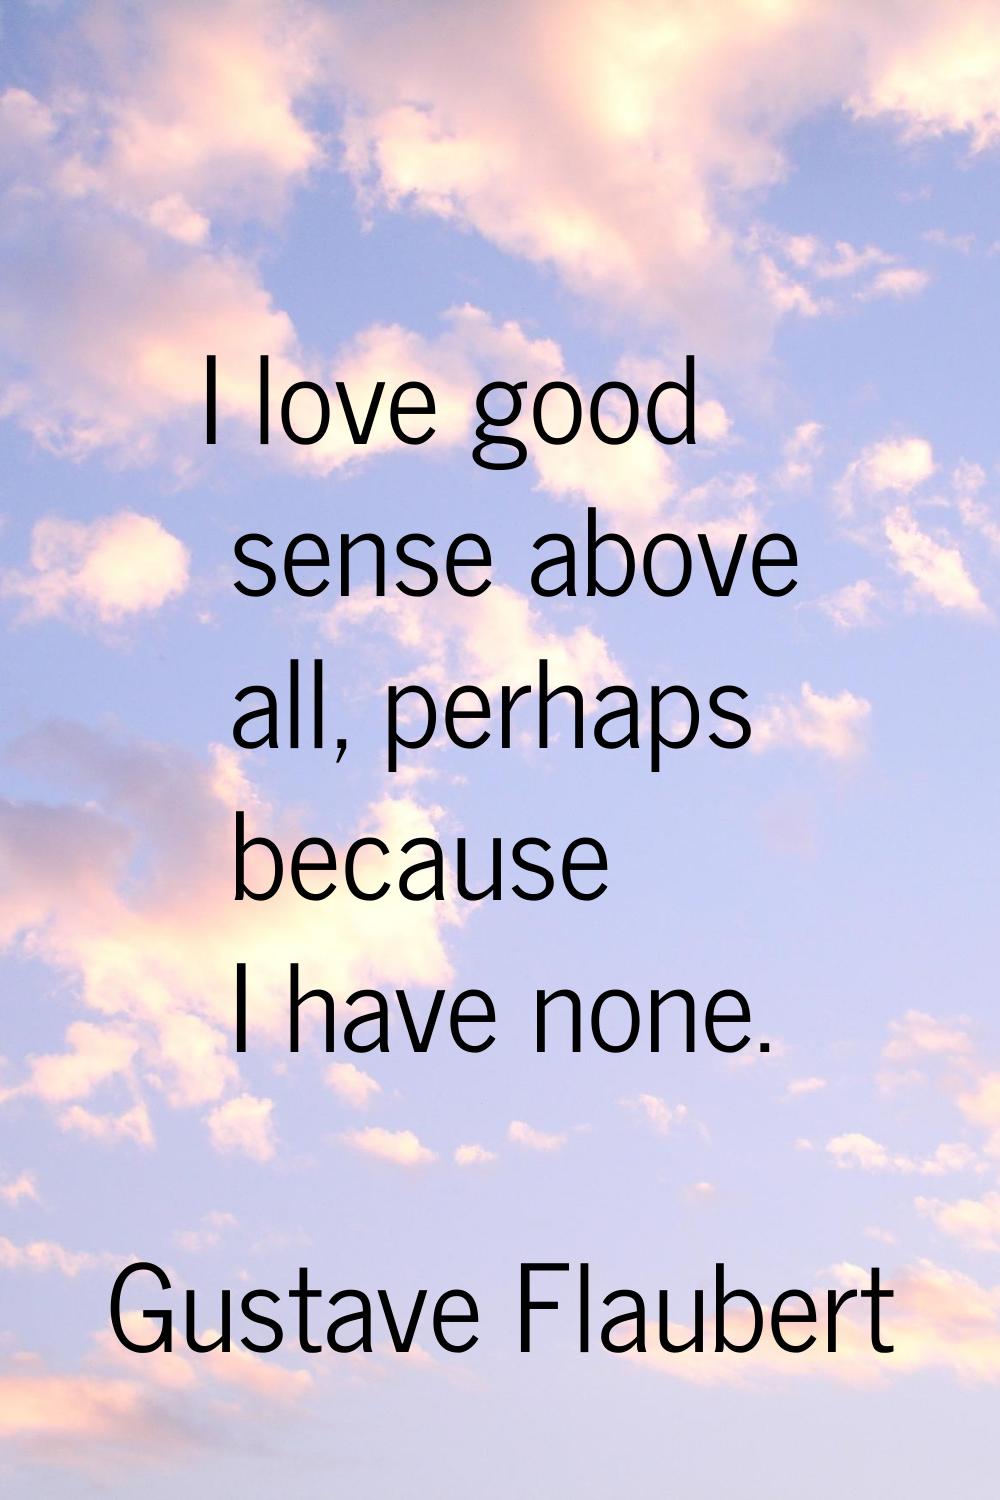 I love good sense above all, perhaps because I have none.